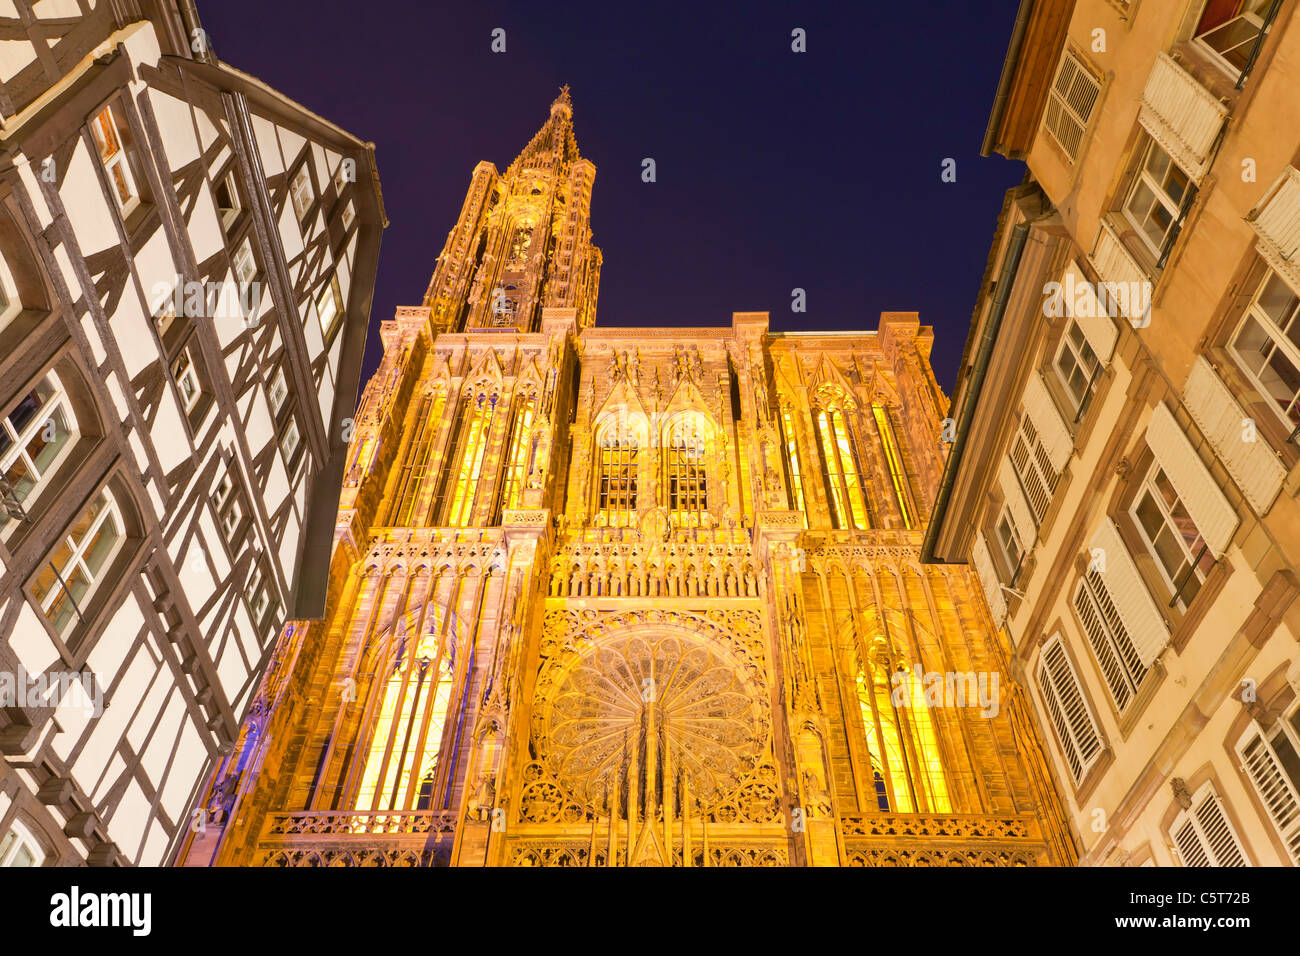 France, Alsace, Strasbourg, View of Notre Dame cathedral and frame houses at night Stock Photo